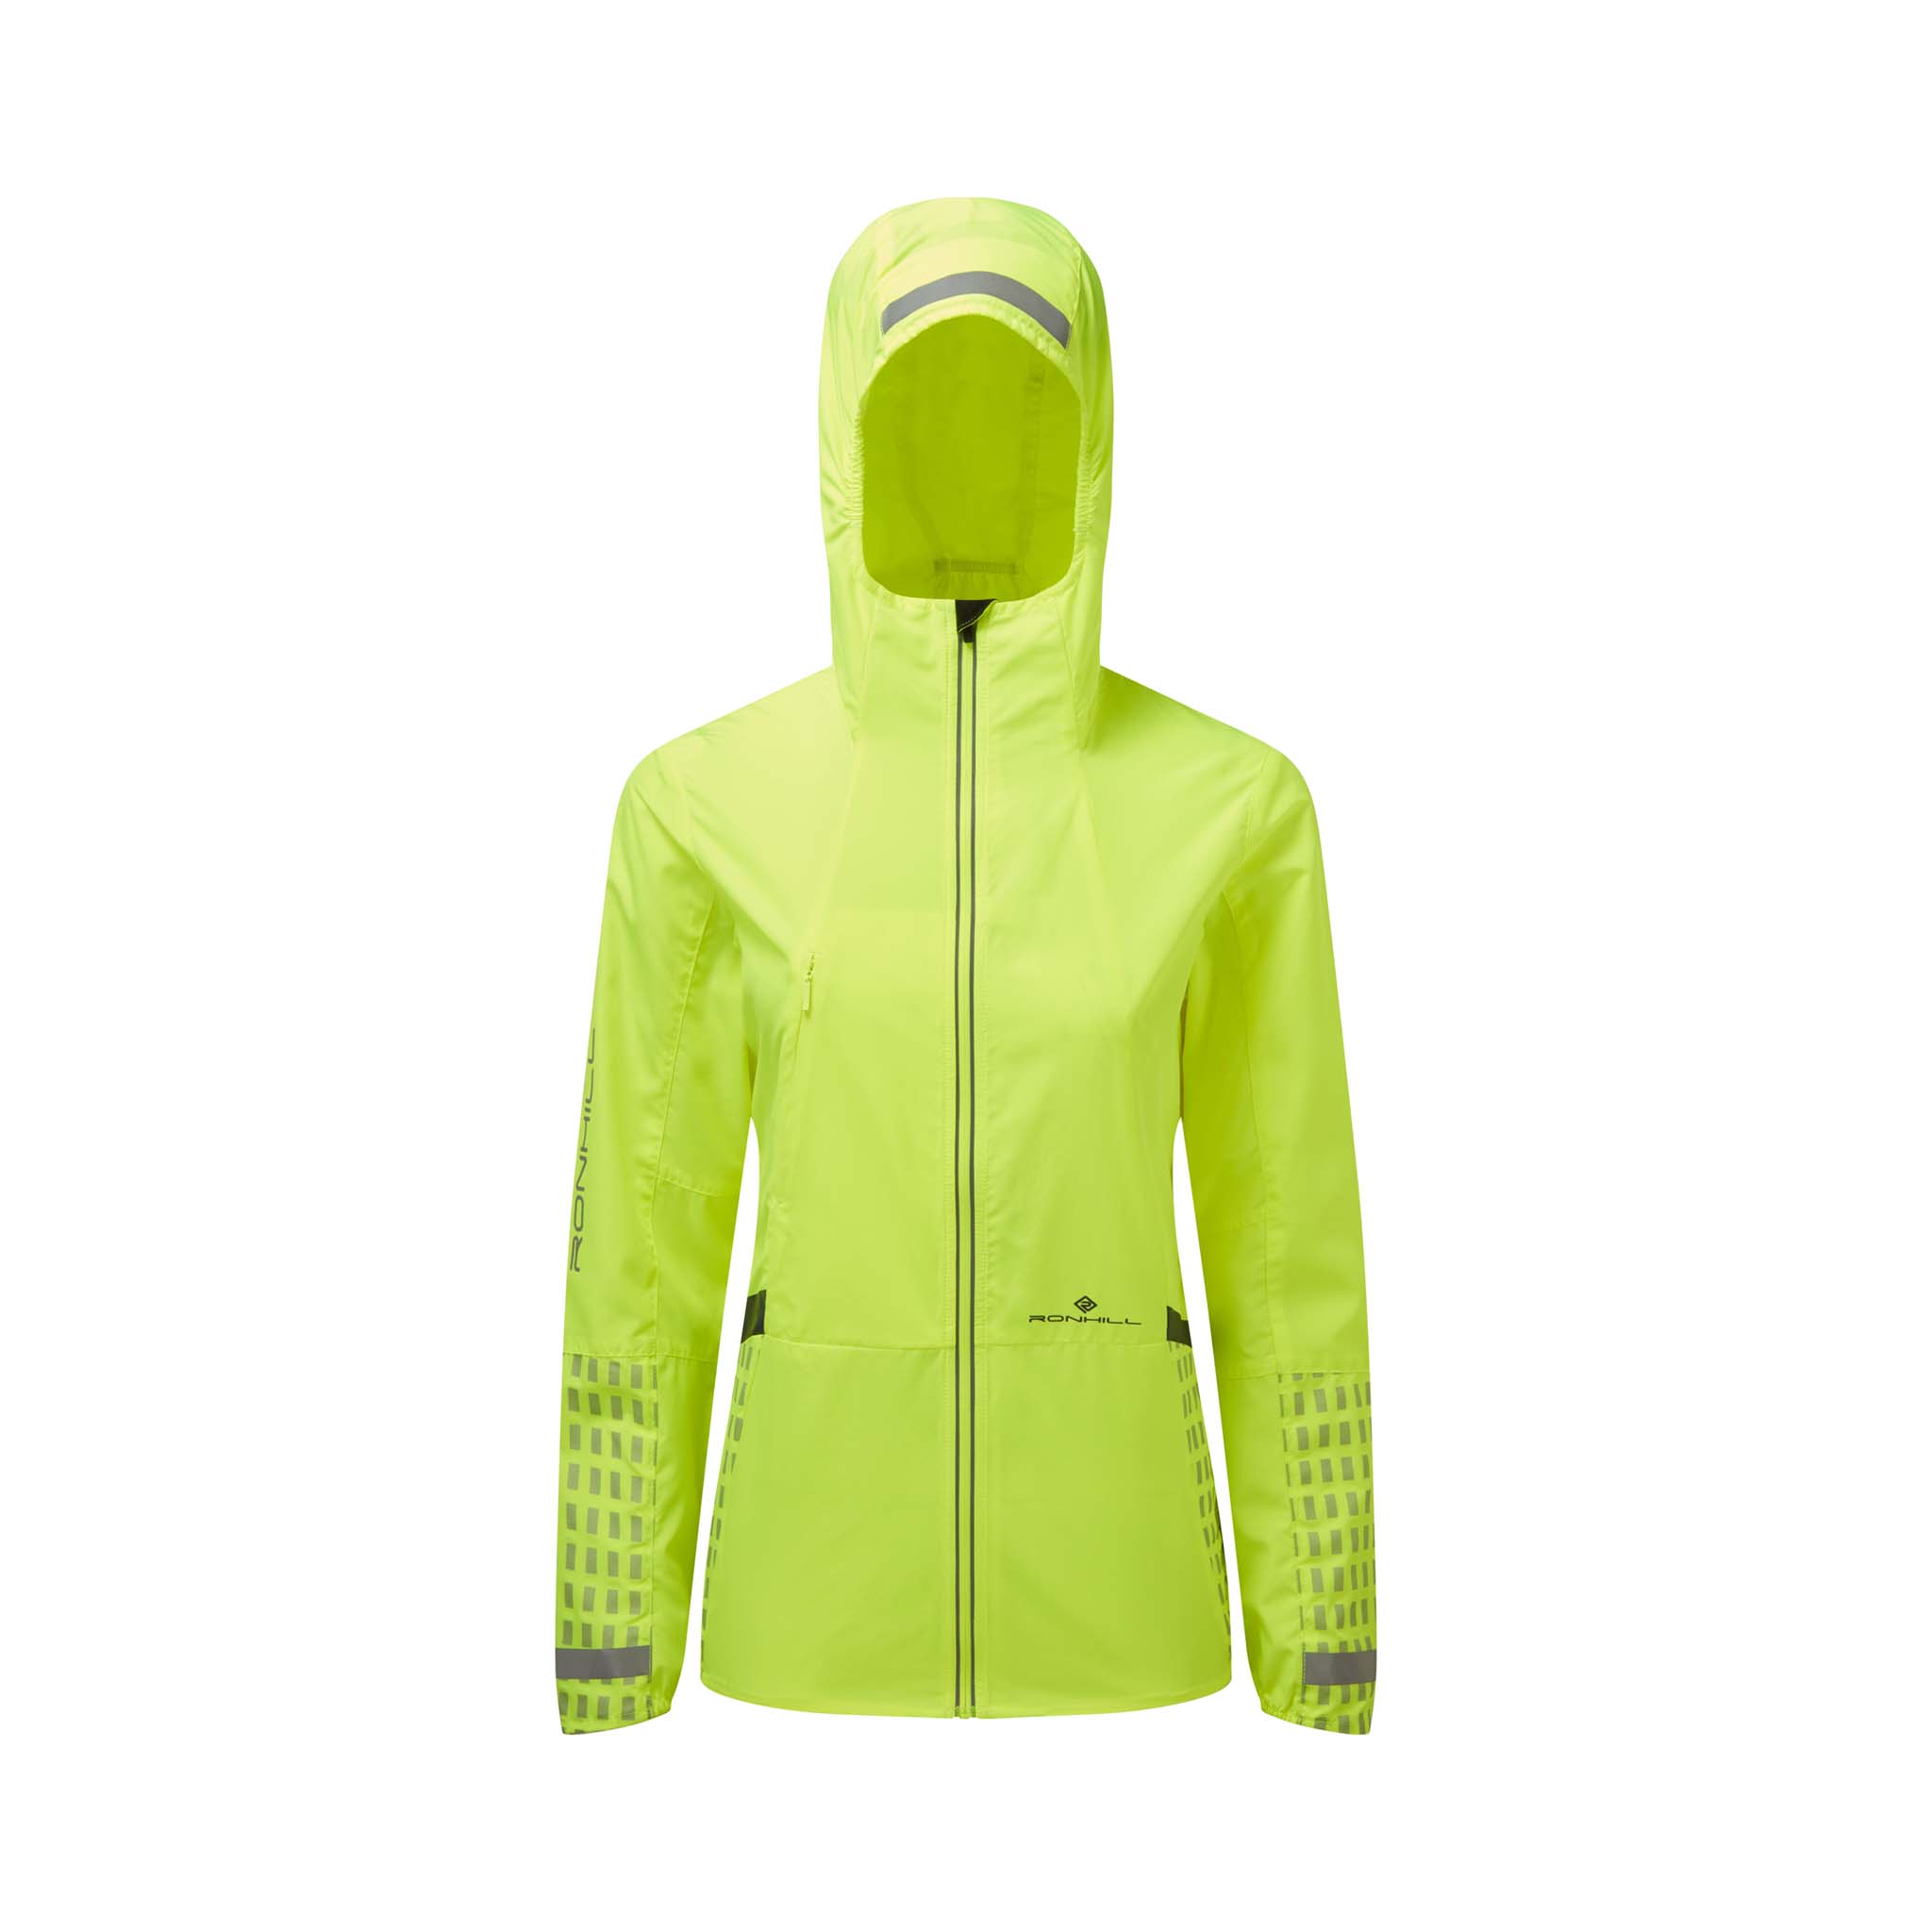 Ronhill Tech Afterhours Mens Jacket (Fluo Yellow/Charcoal/Reflective), Ronhill, All Mens Clothing, Mens Clothing